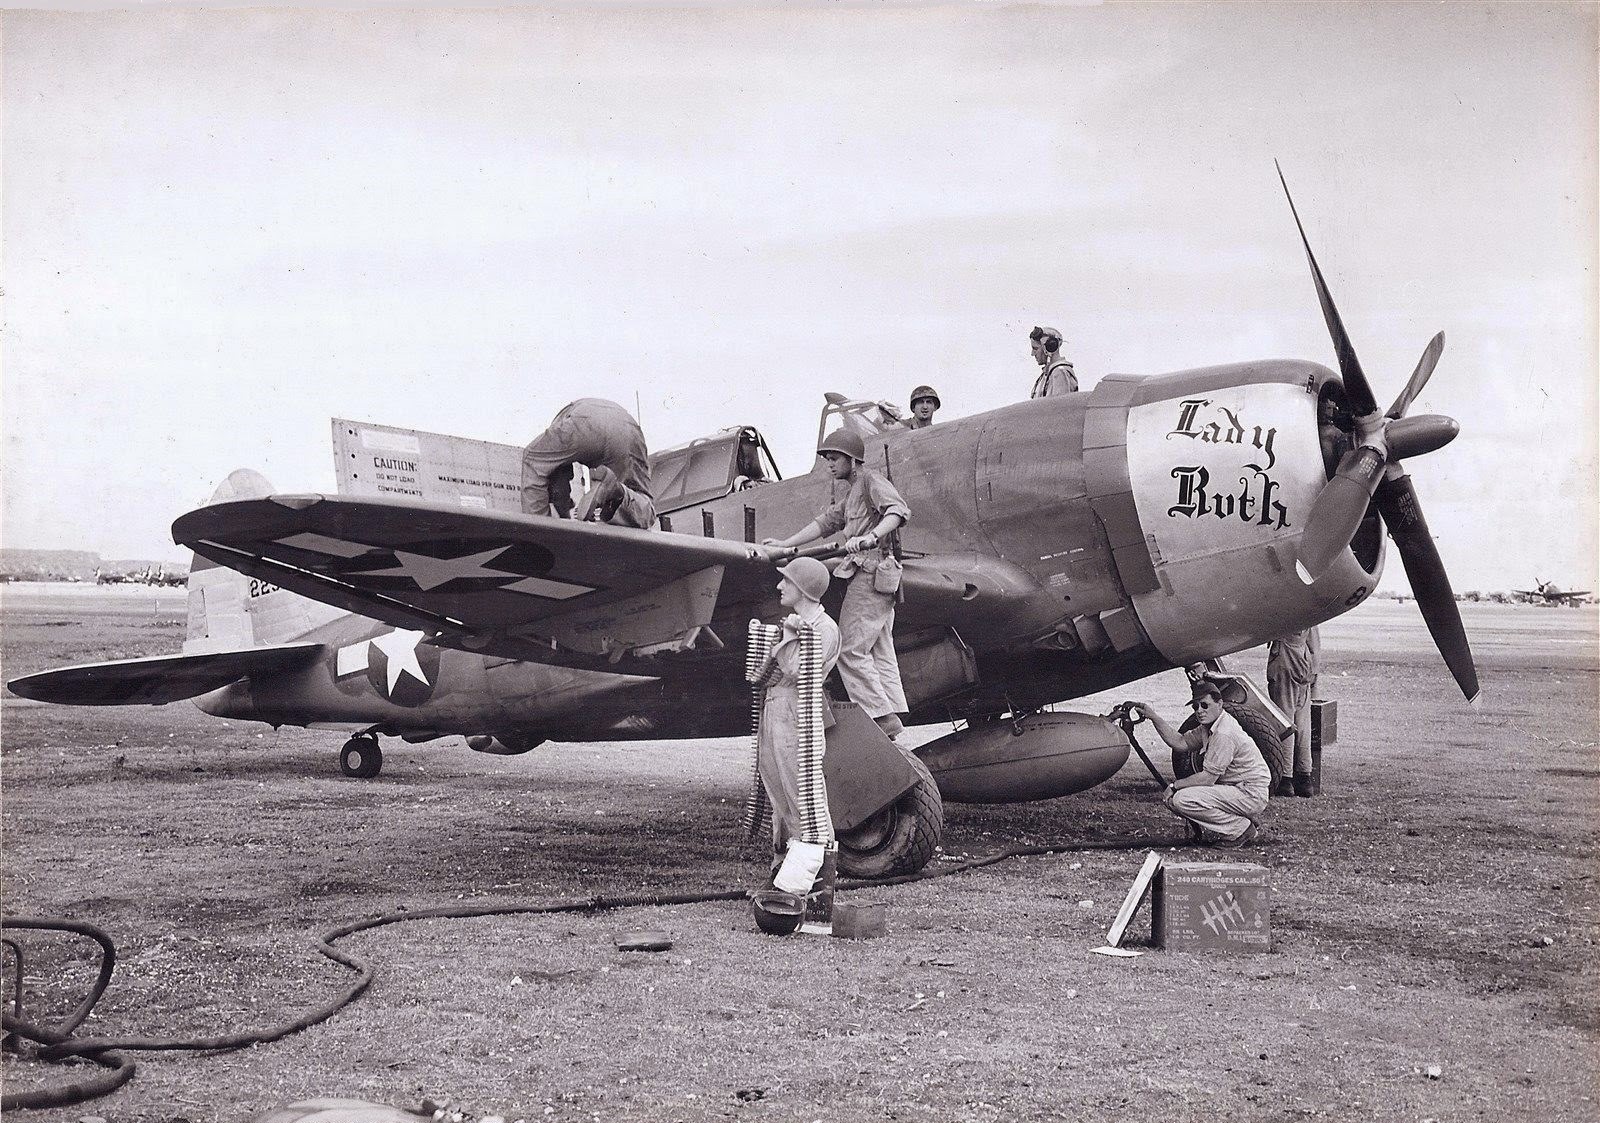 A staged photograph of ground crews performing their collective duties to service P-47D Thunderbolt ‘Lady Ruth’ of the 318th Fighter Group at East Field, Saipan, Mariana Islands, Jun 1944-Apr 1945